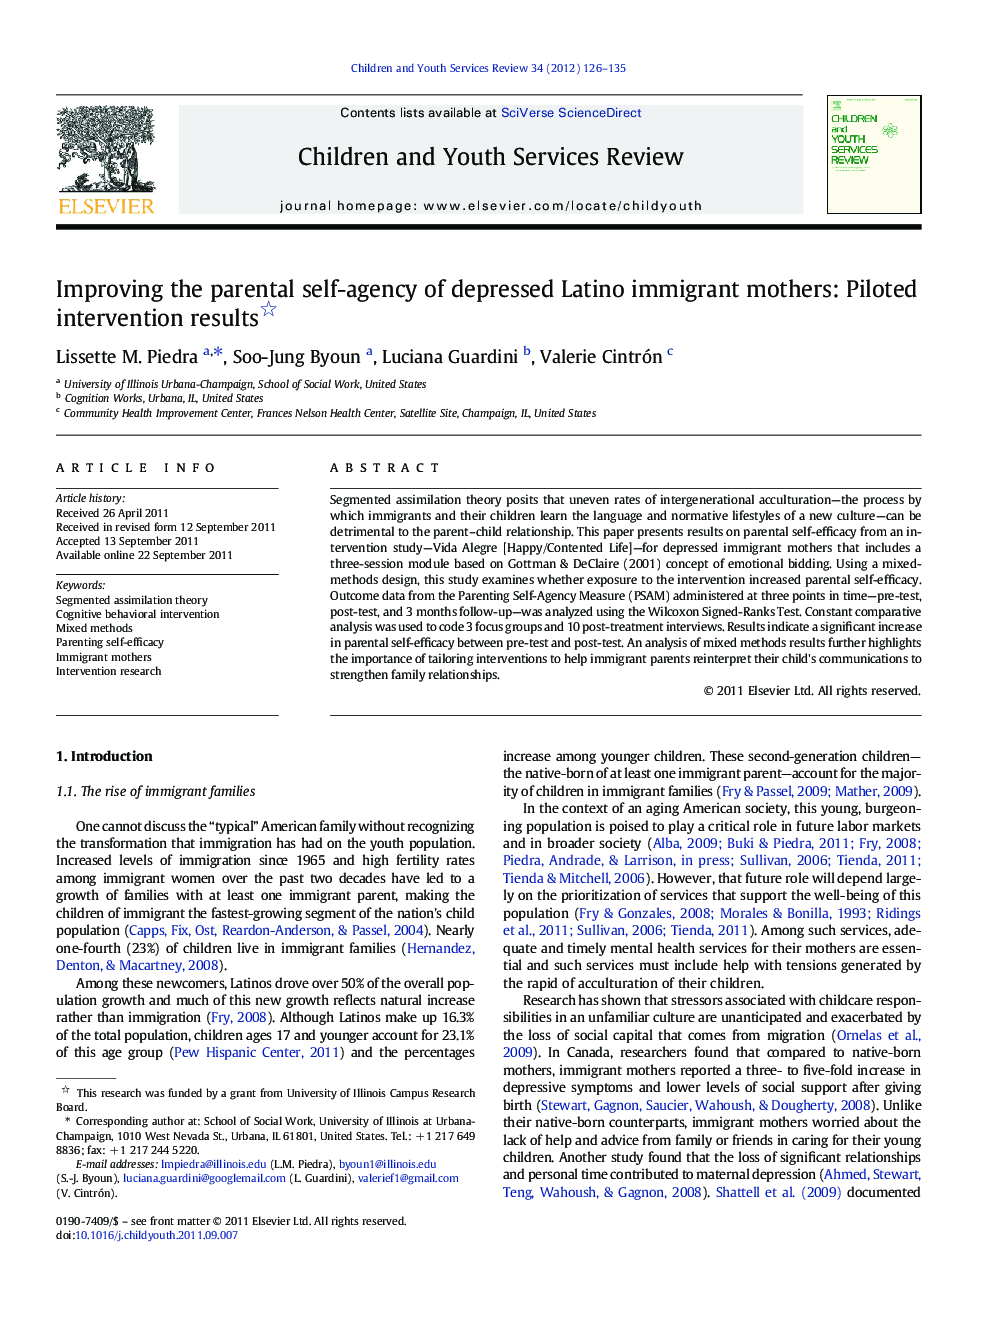 Improving the parental self-agency of depressed Latino immigrant mothers: Piloted intervention results 